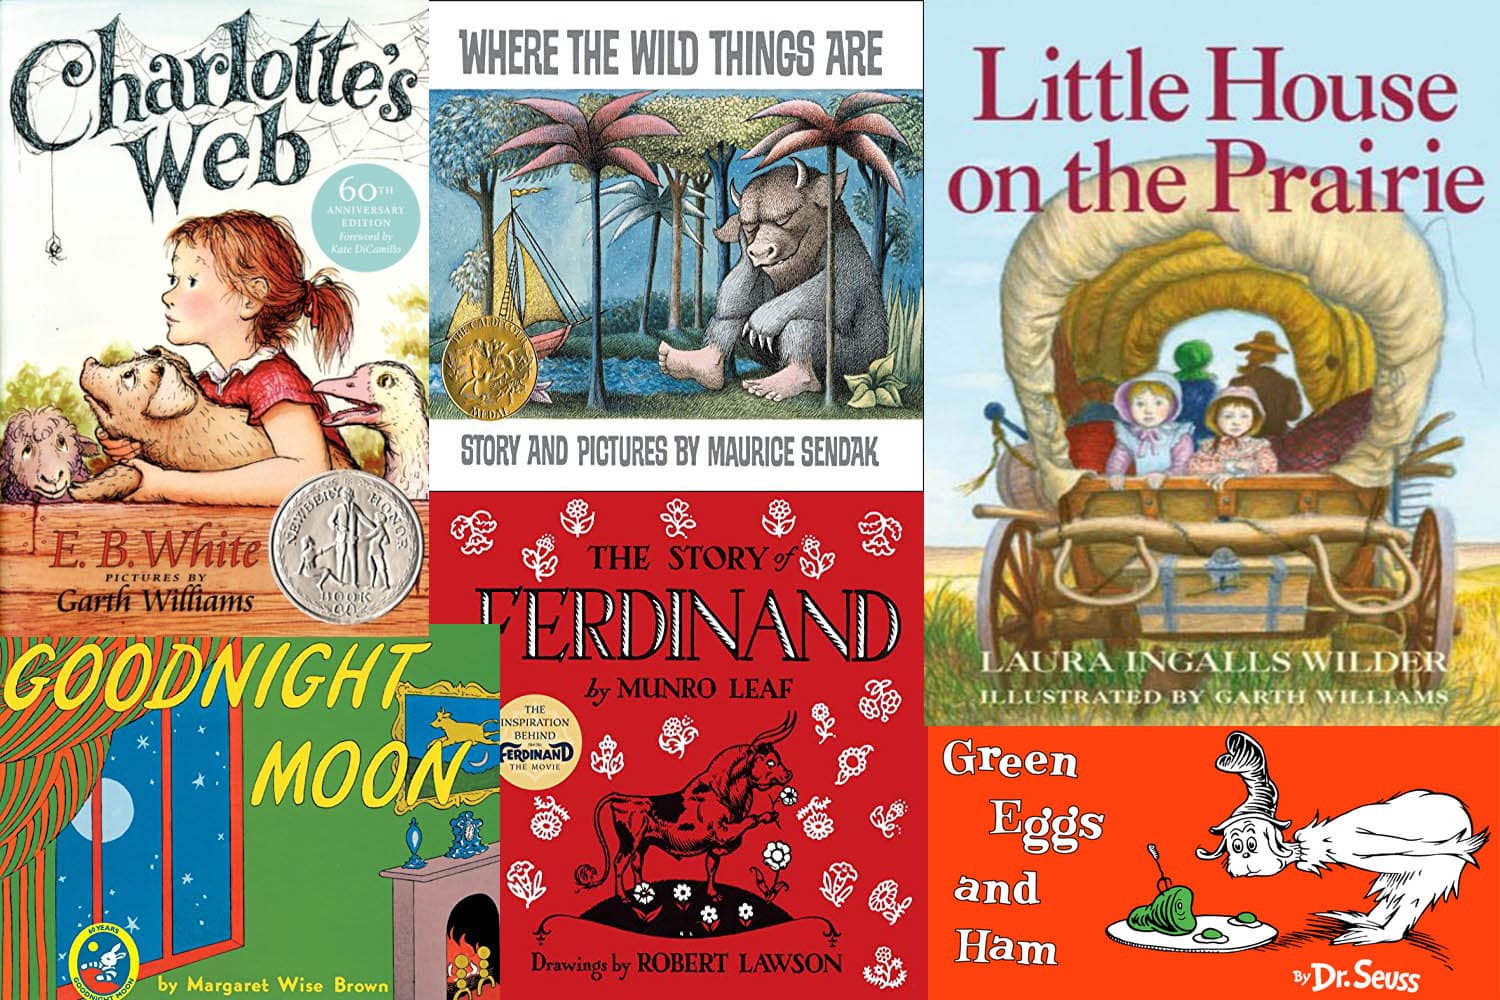 Childrens Books Written For Adults Top 10 children's book review